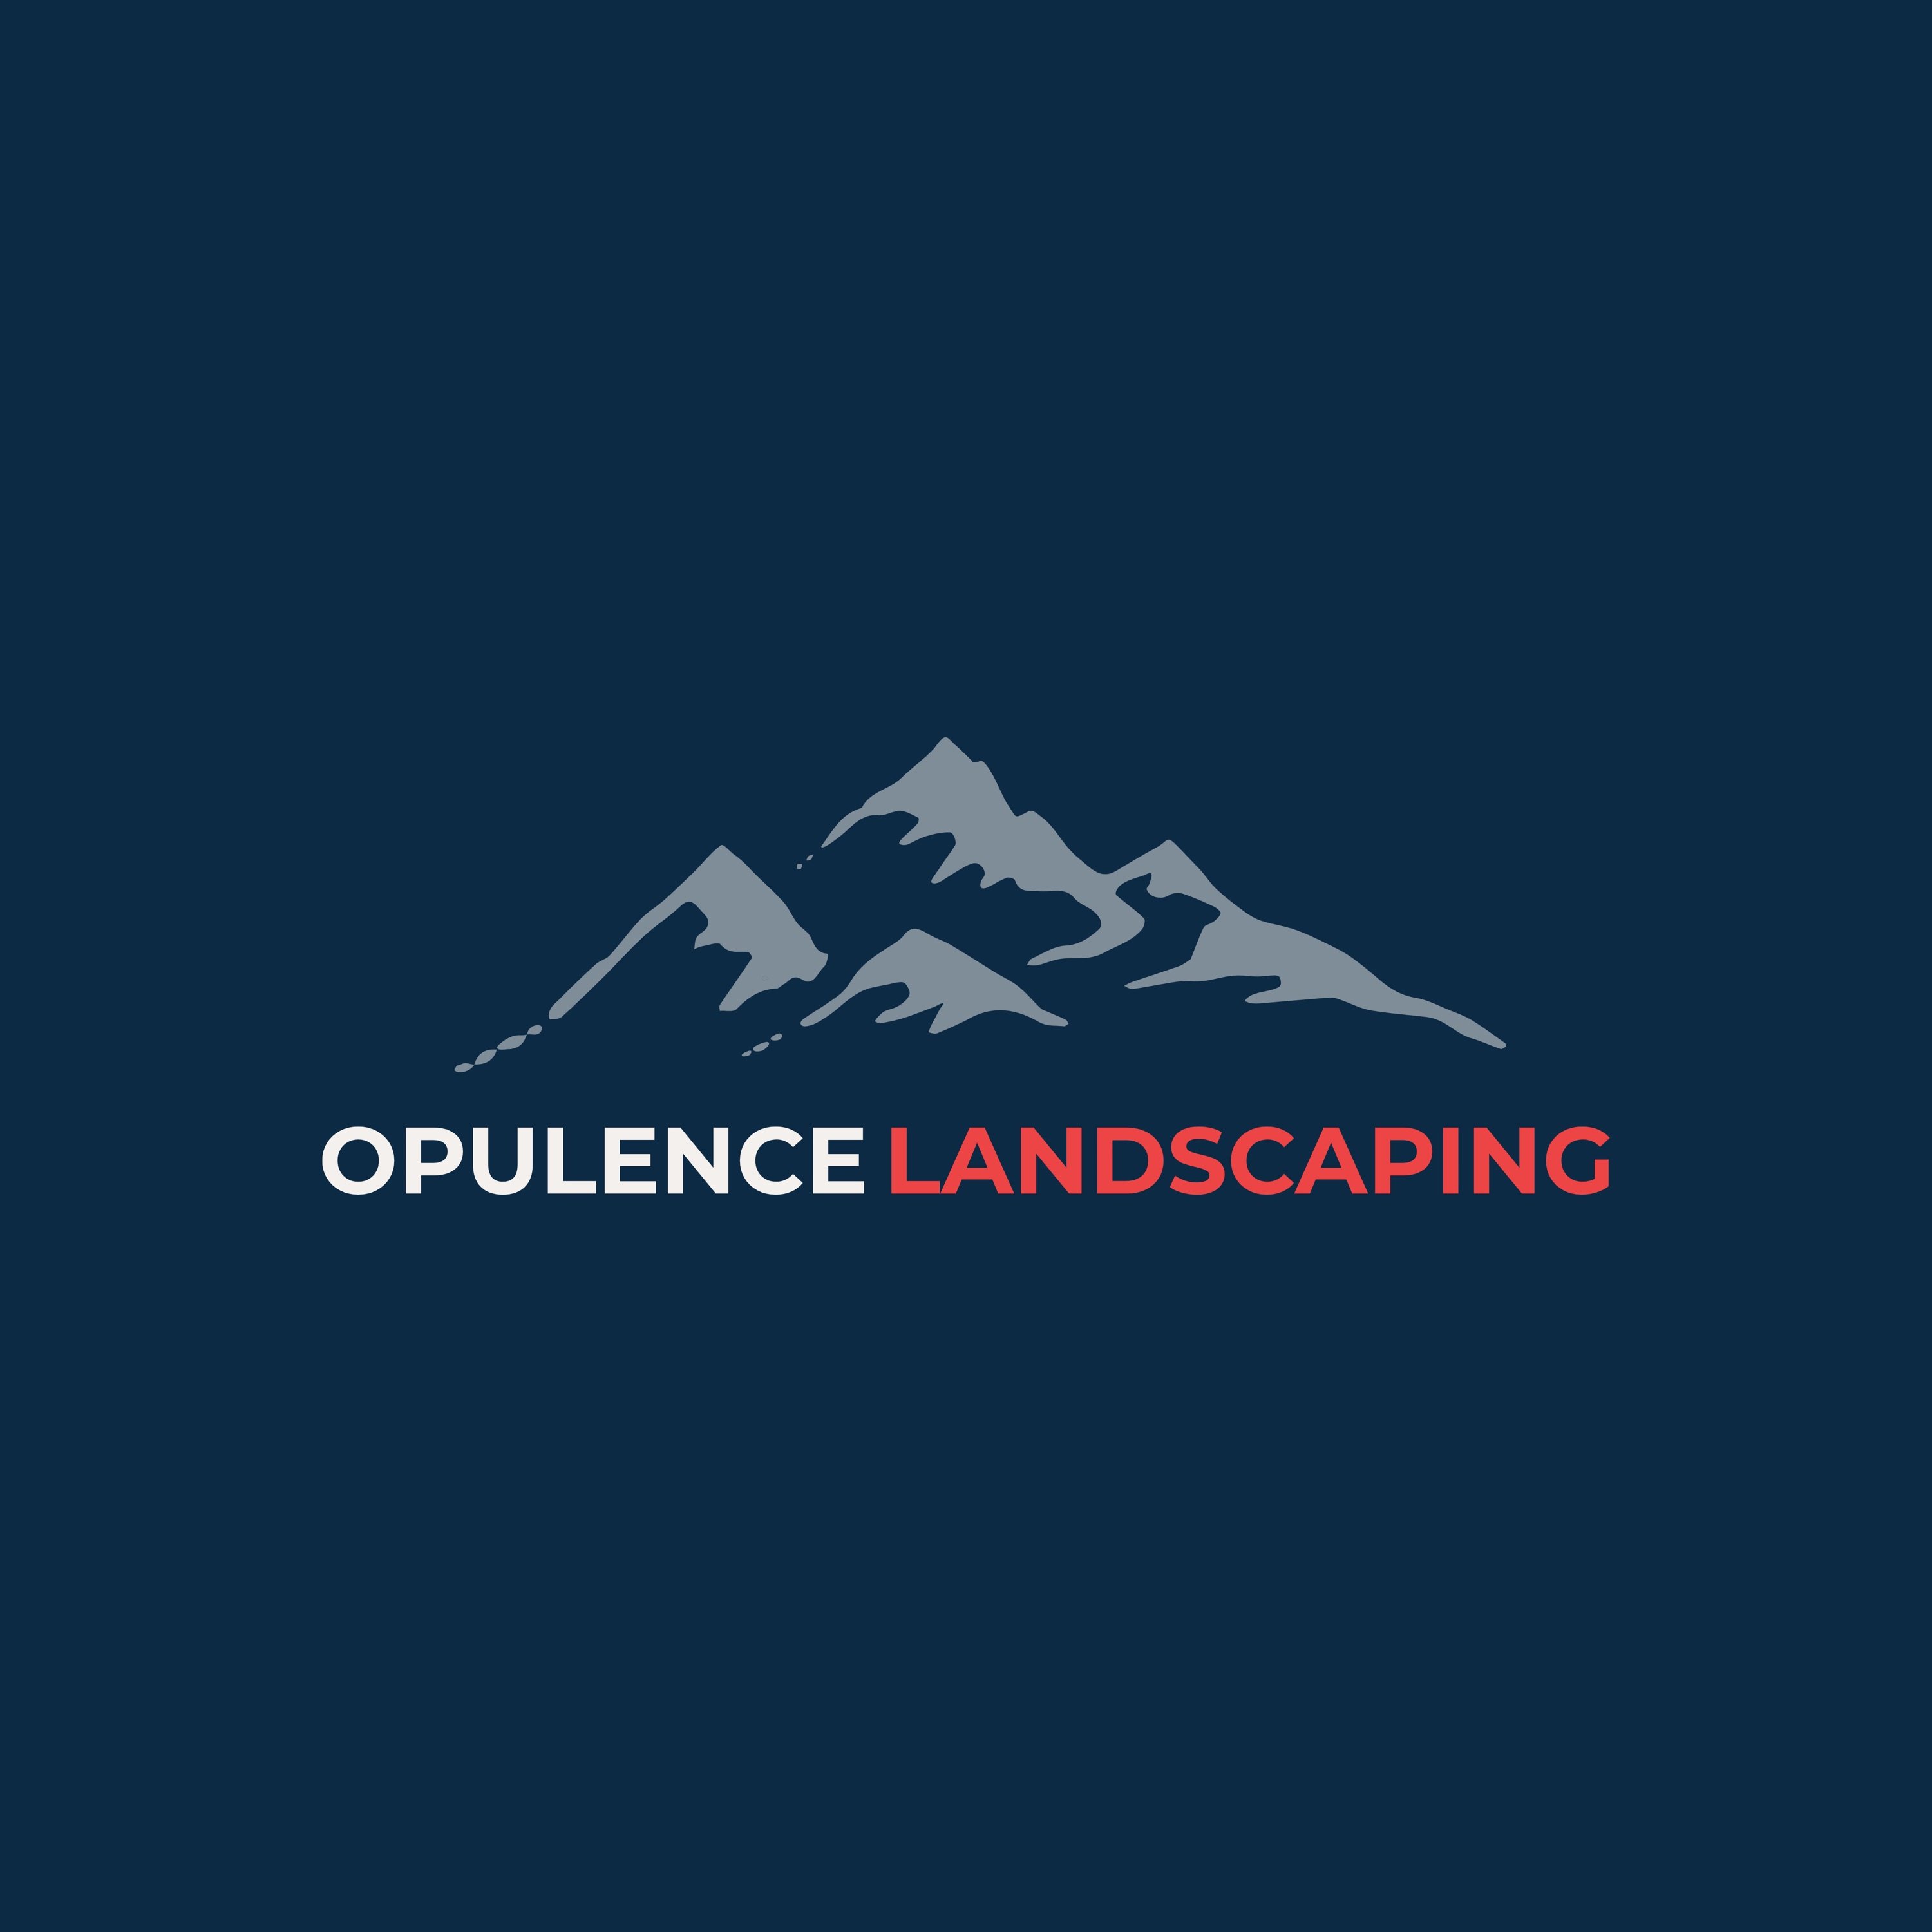 Opulence Landscaping - Unlicensed Contractor Logo